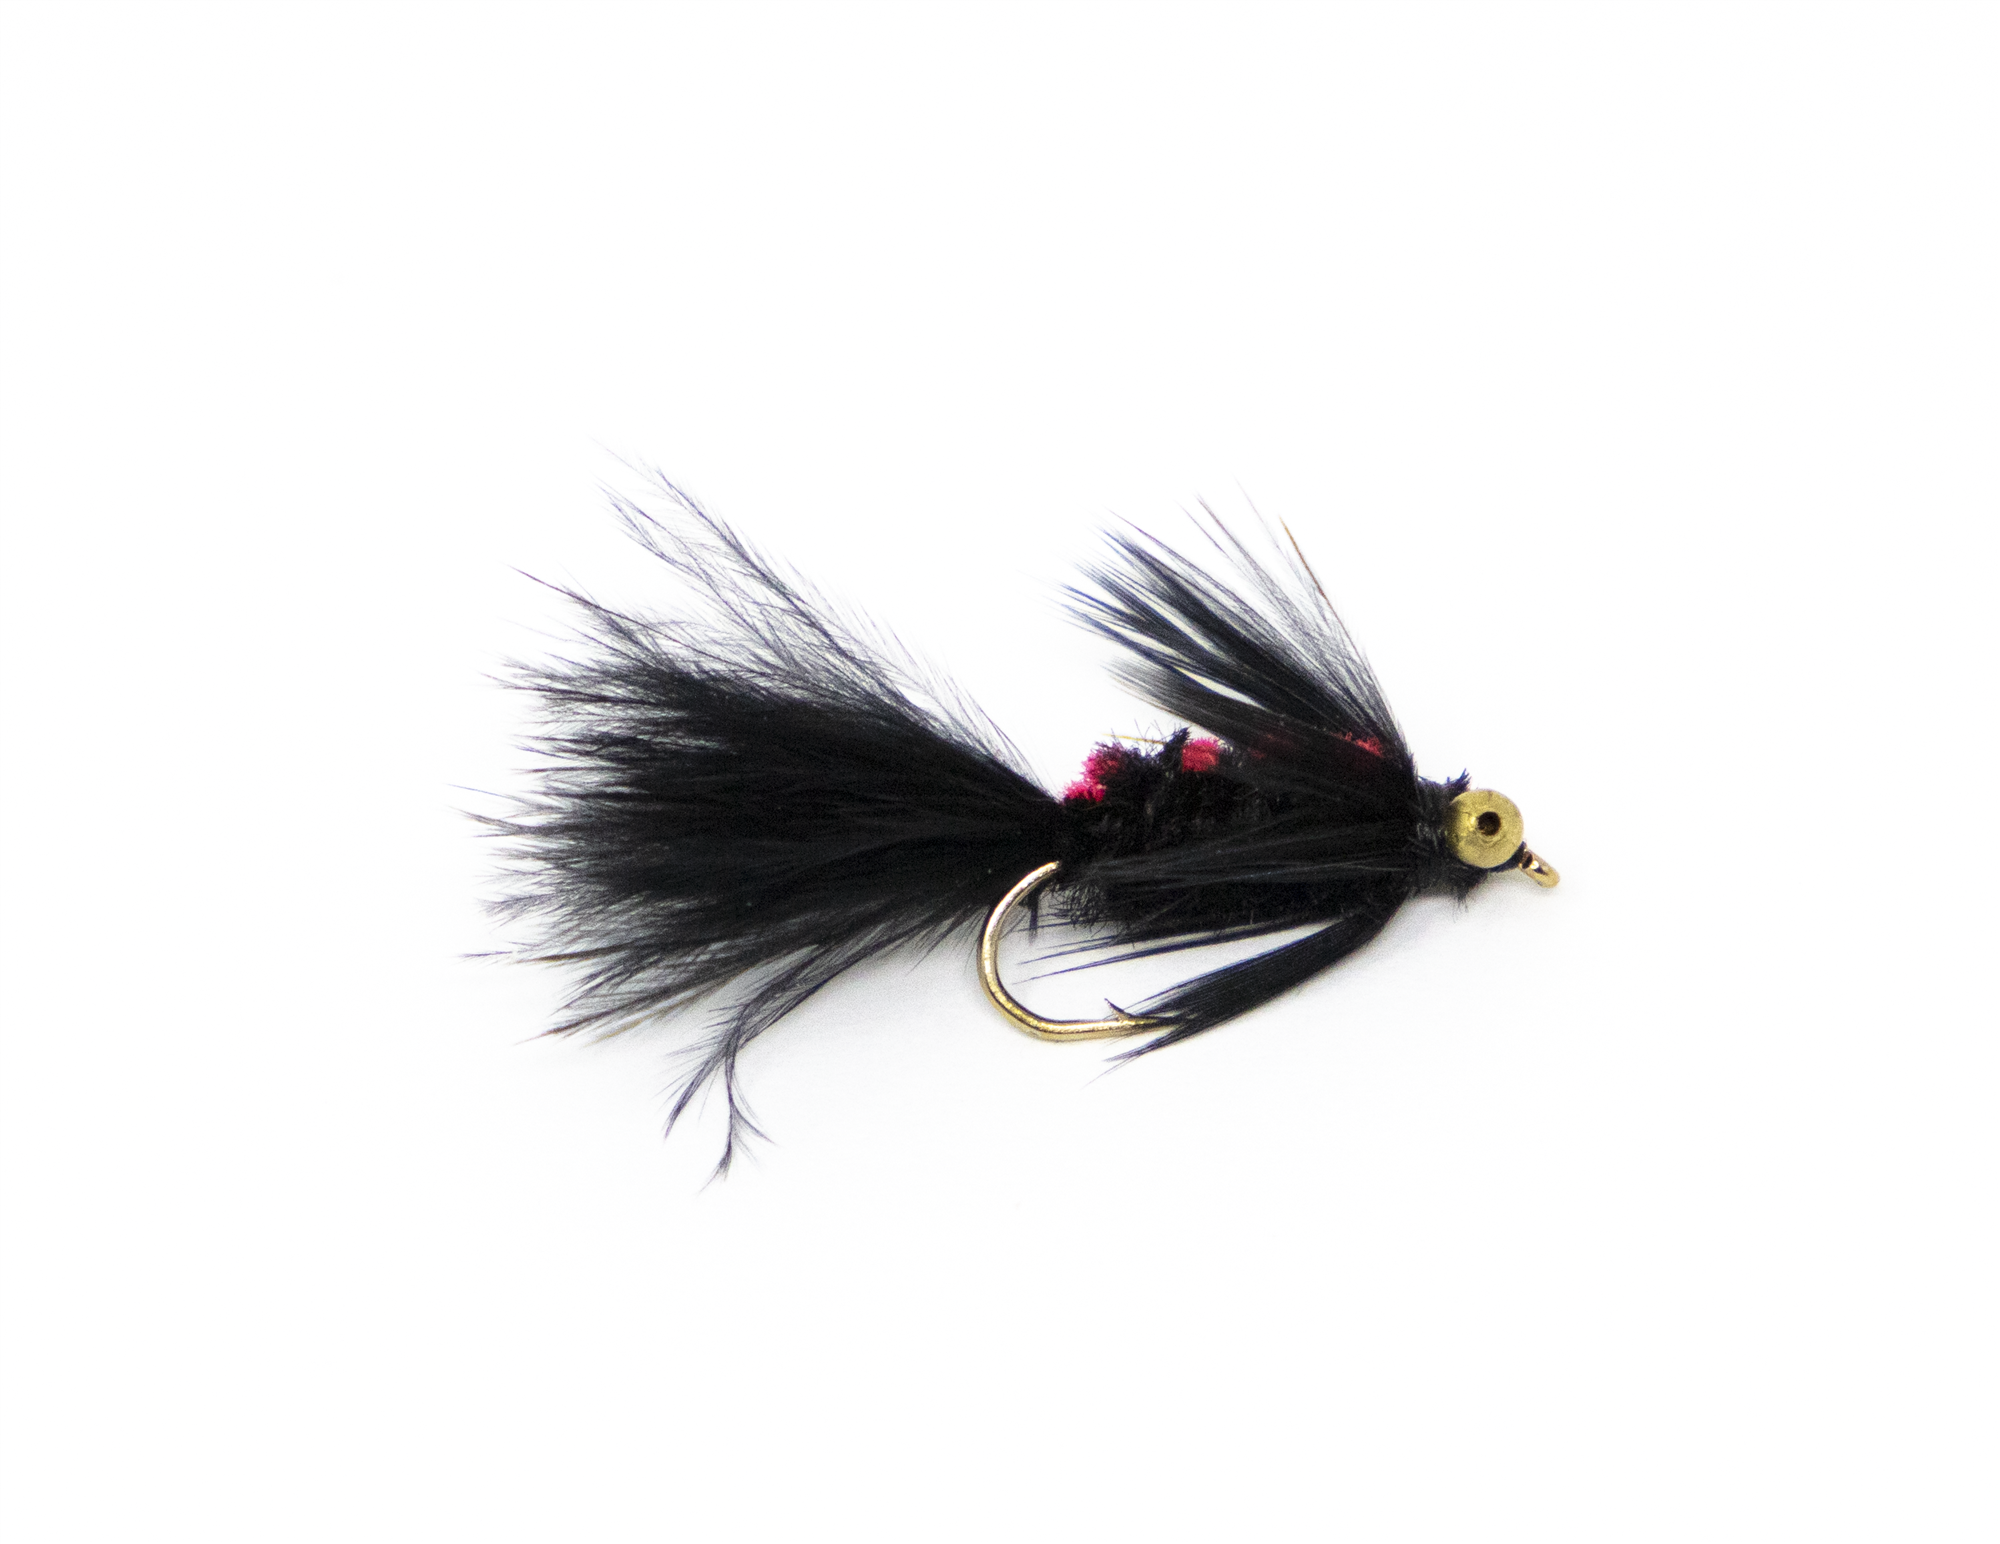 Mihulka's Crappie Special Fly in black color for fly fishing panfish bass and trout.